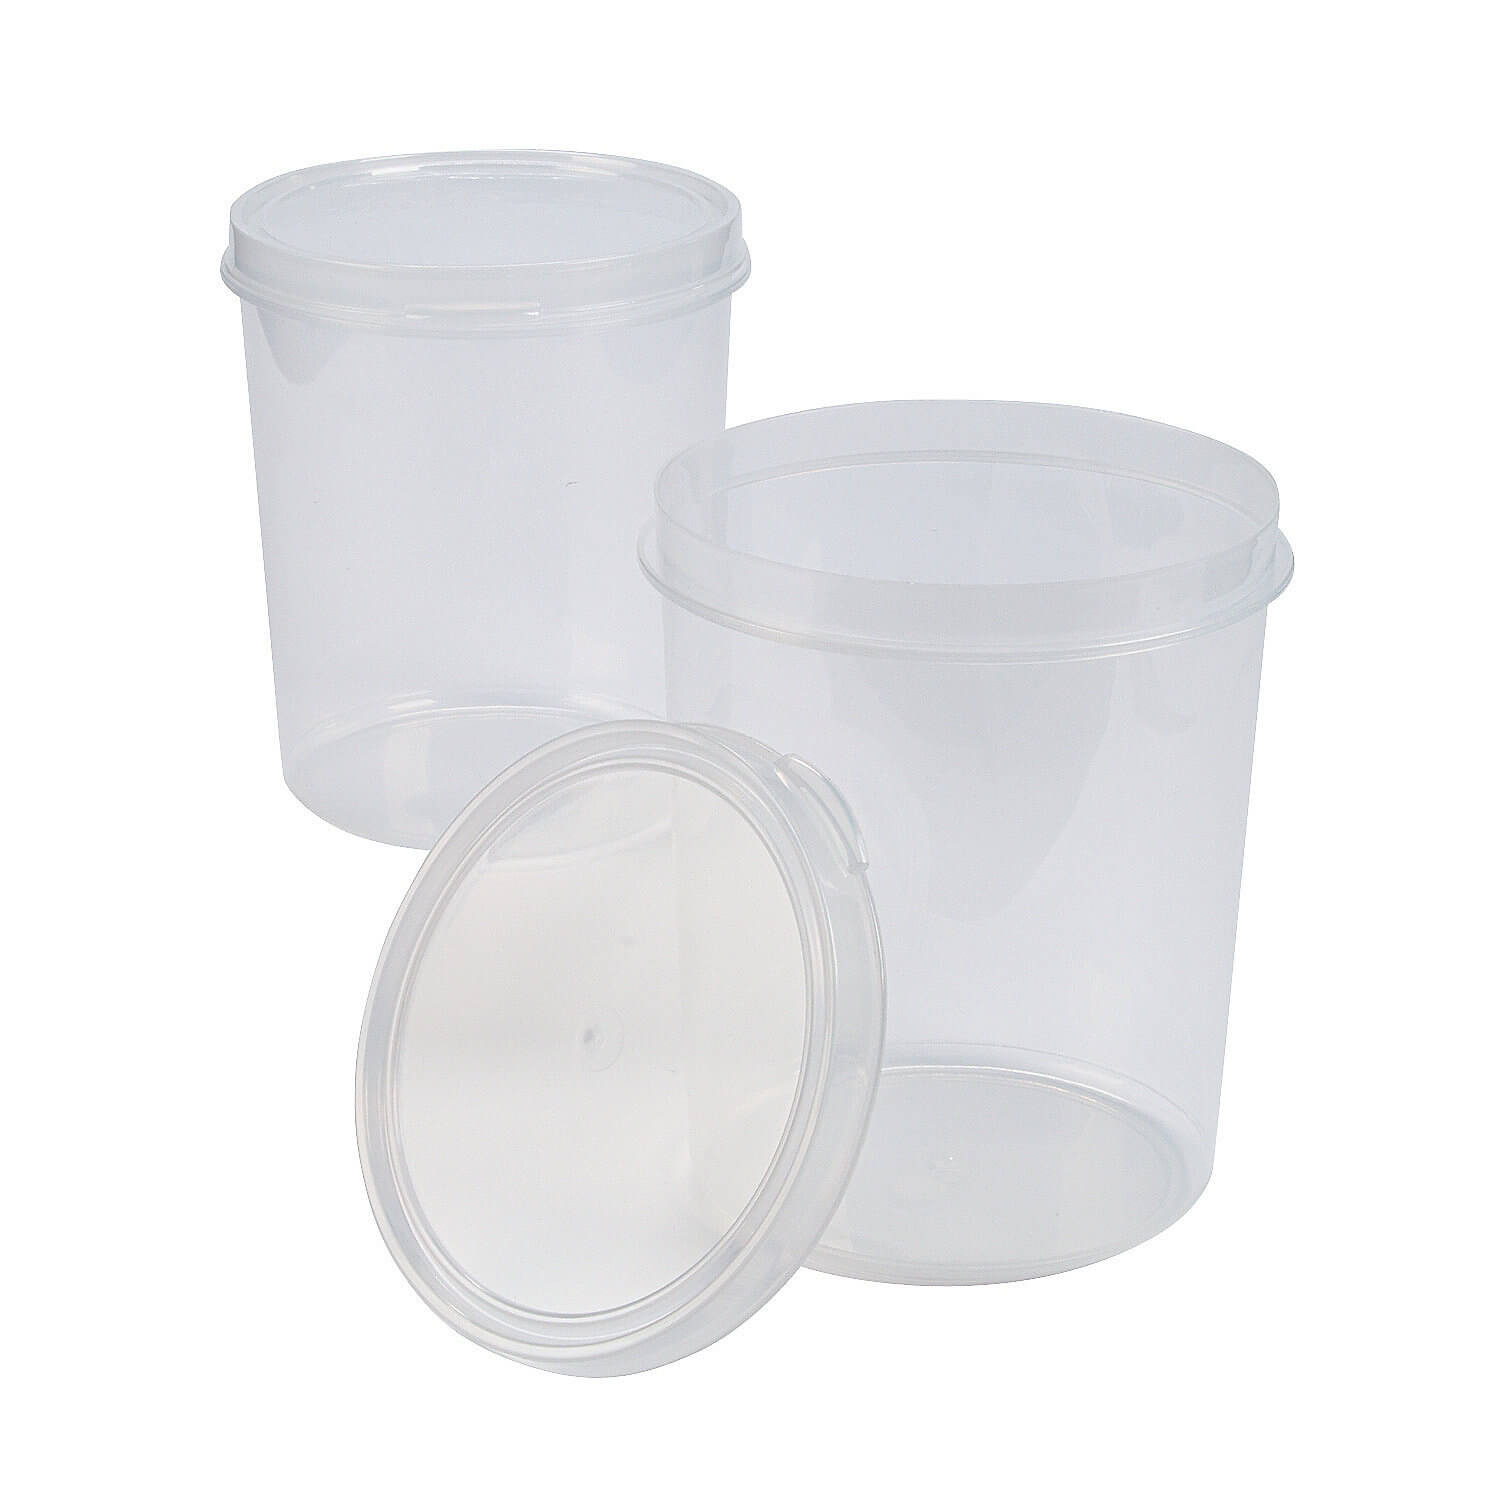 W13673673 Clear Round Containers With Lids - 6 Pc.